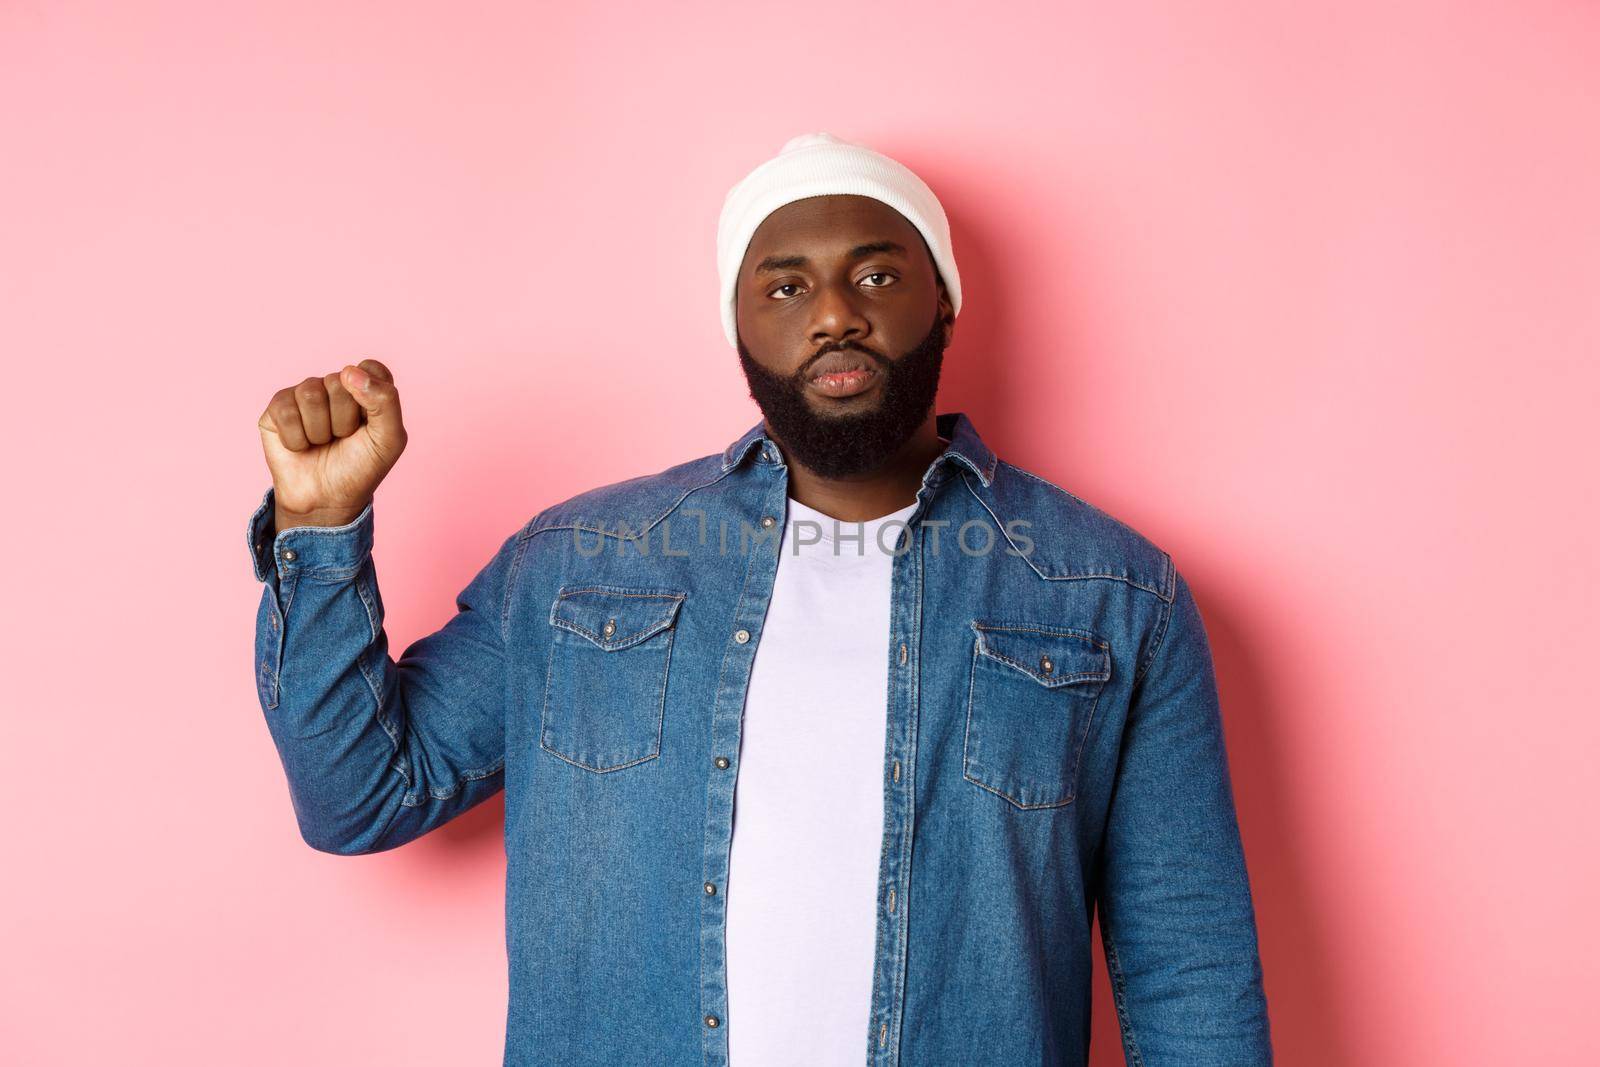 Serious and confident african-american male activist, raising fist, support Black lives matter BLM movement, fight for human rights against racism, pink background.